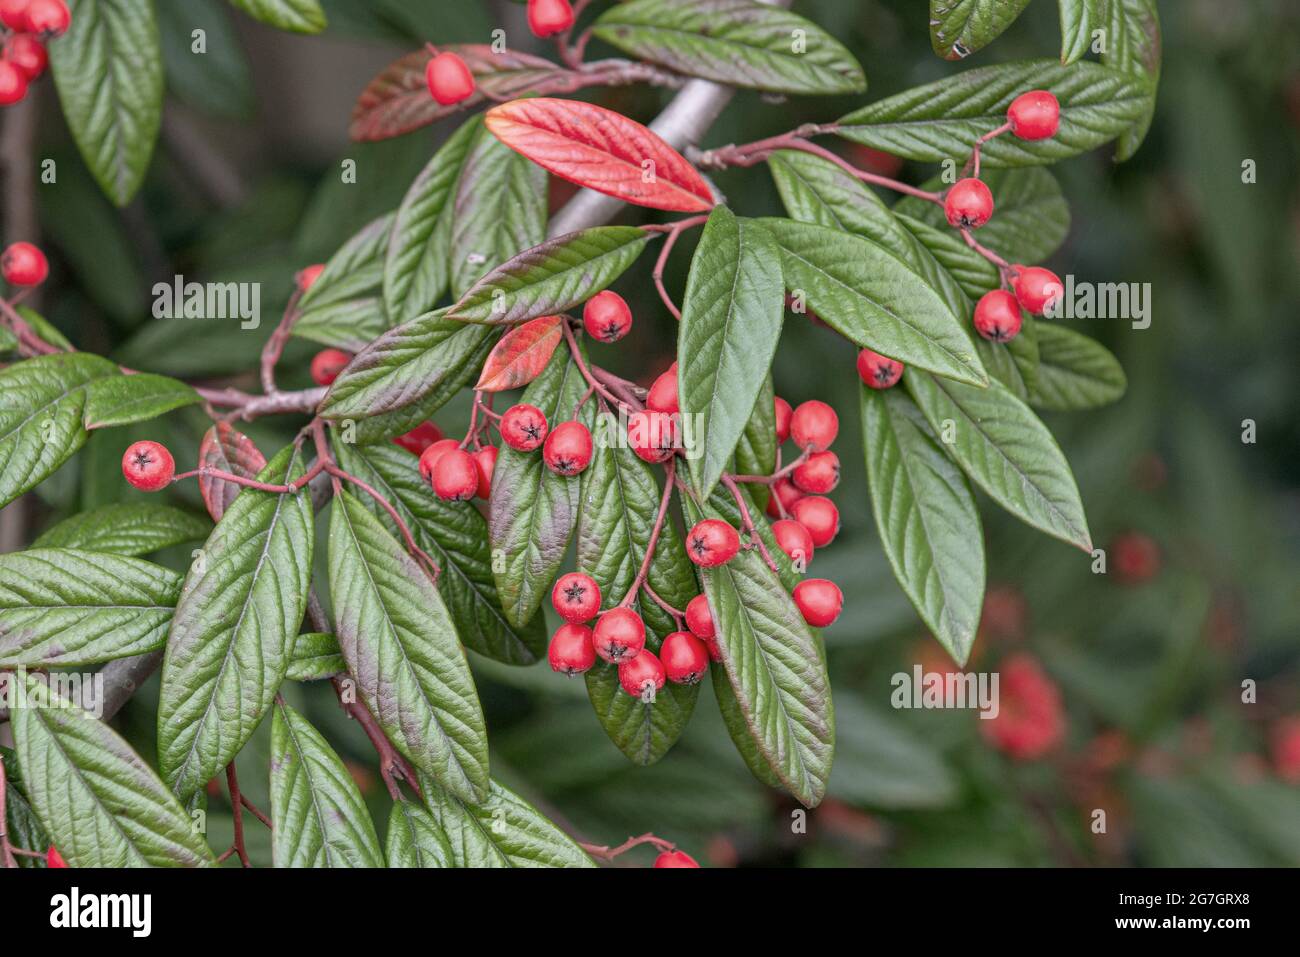 Cotoneaster (Cotoneaster floccosus, Cotoneaster salicifolius floccosus), branch with fruits Stock Photo